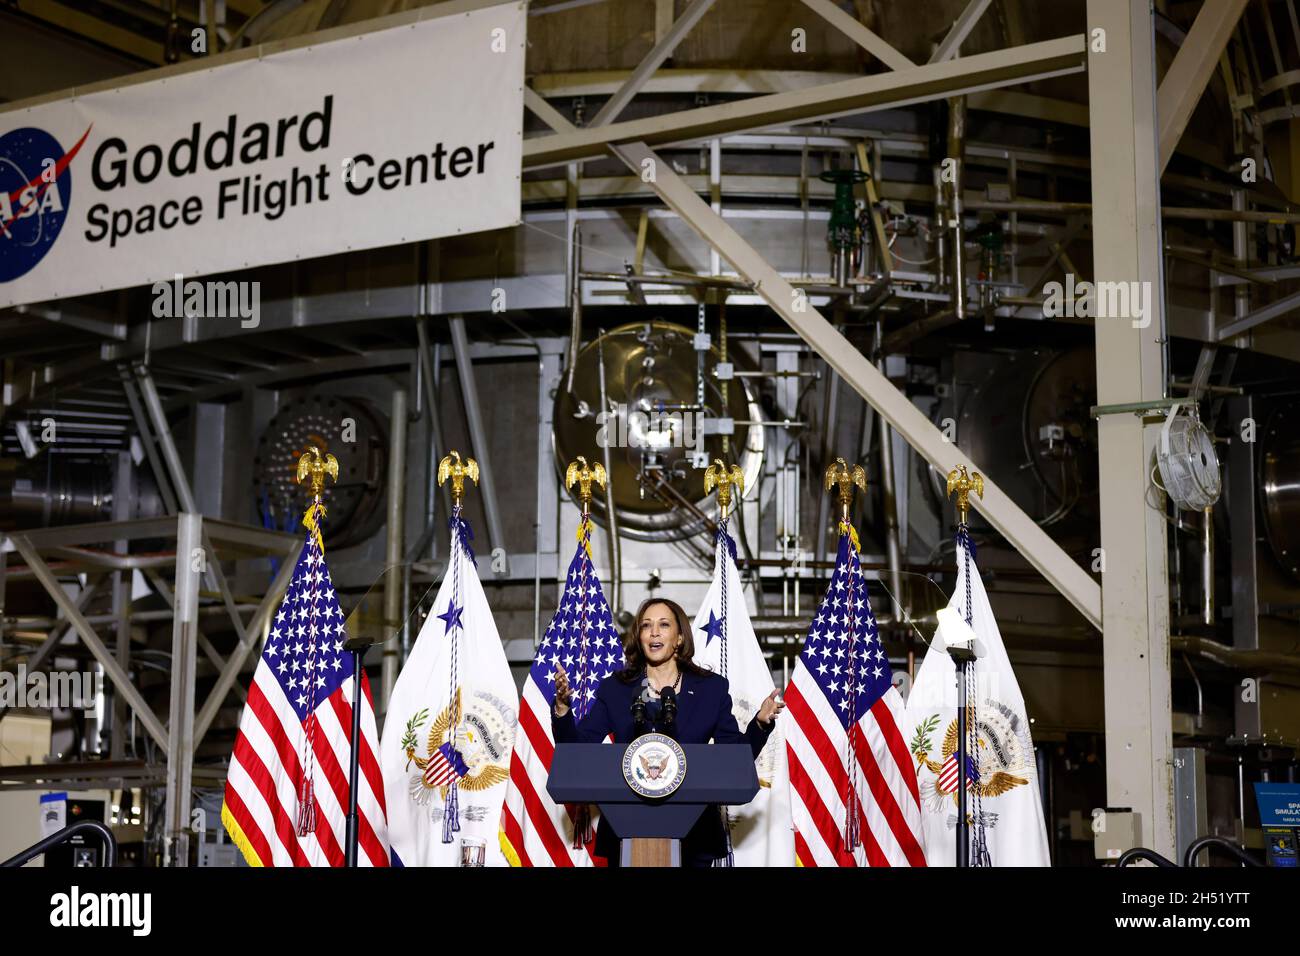 Greenbelt, USA. 05th Nov, 2021. United States Vice President Kamala Harris speaks at the National Aeronautics and Space Administration (NASA) Goddard Space Flight Center in Greenbelt, Maryland, U.S., on Friday, November 5, 2021. Harris announced the Biden administration's inaugural meeting of the National Space Council will be held on December 1, 2021. Credit: Ting Shen/Pool via CNP Photo via Credit: Newscom/Alamy Live News Stock Photo